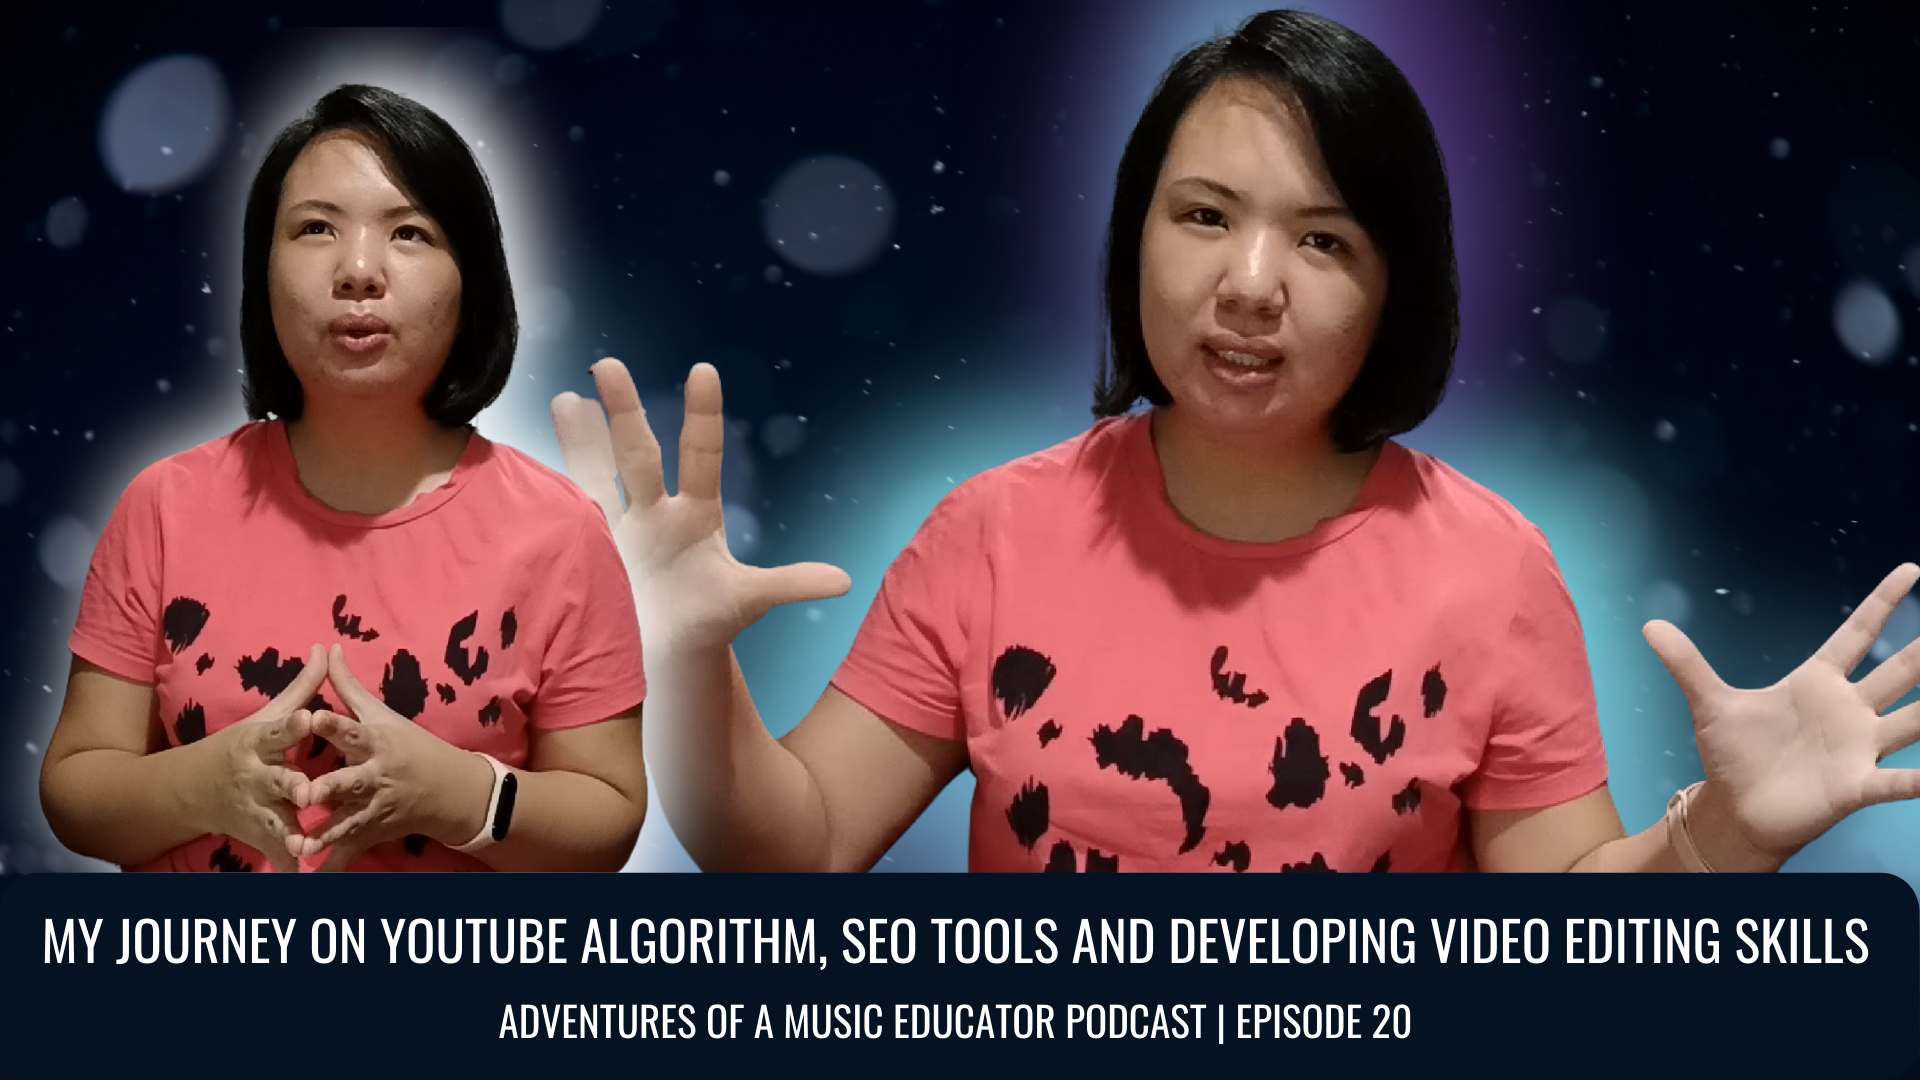 My Journey on YouTube Algorithm, SEO Tools and Developing Video Editing Skills